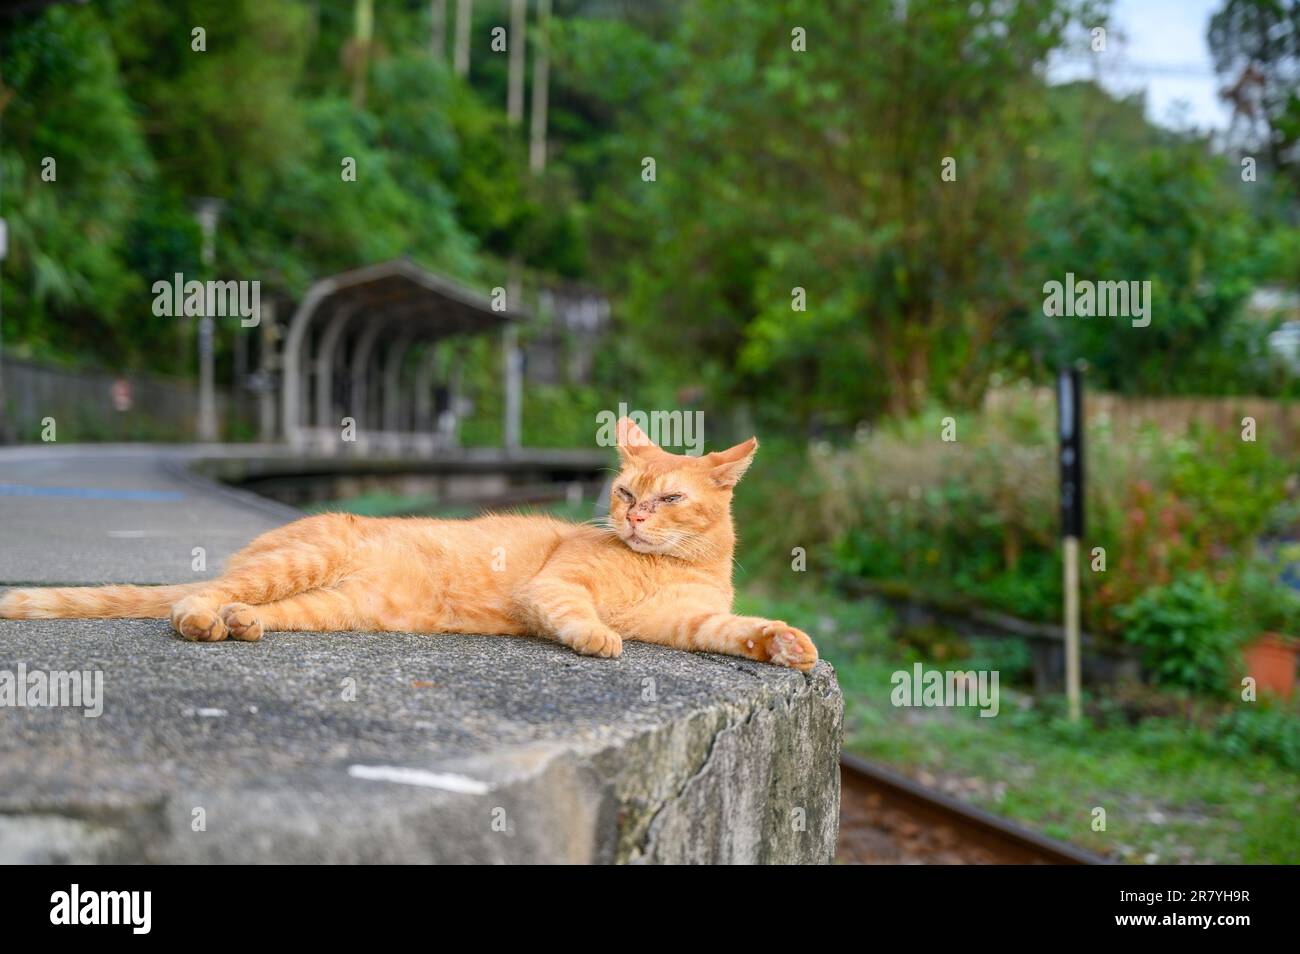 A yellow cat sleepily squints. The cat lay on the platform of the old railway station. Stock Photo